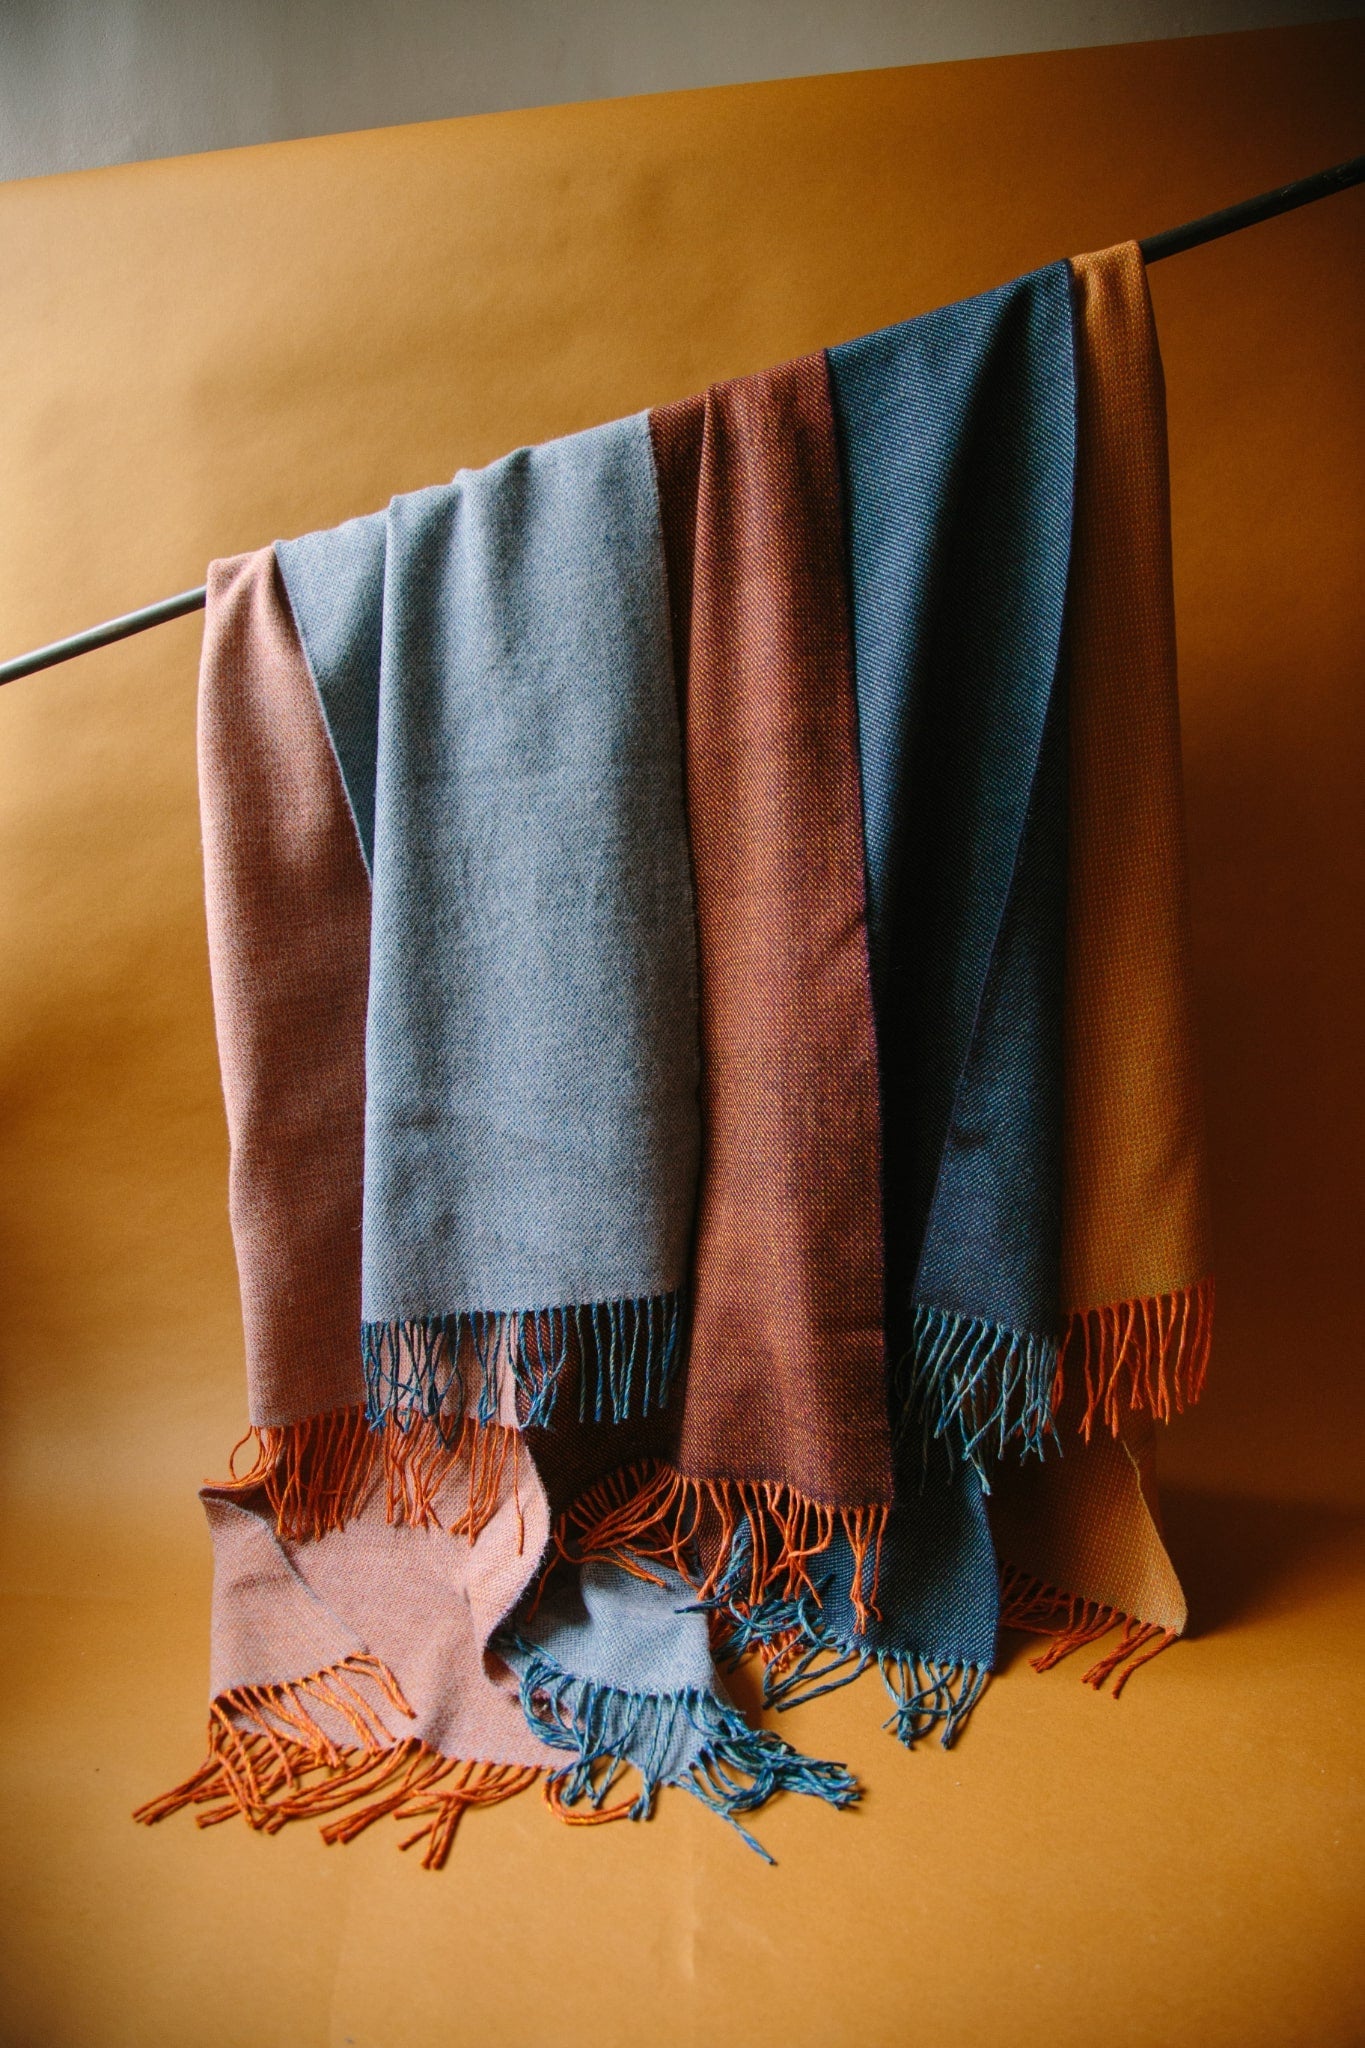 Group of five merino wool scarves hanging from a black curtain pole against a brown background. The scarves are in shades of reds and blues with tassels at the ends.